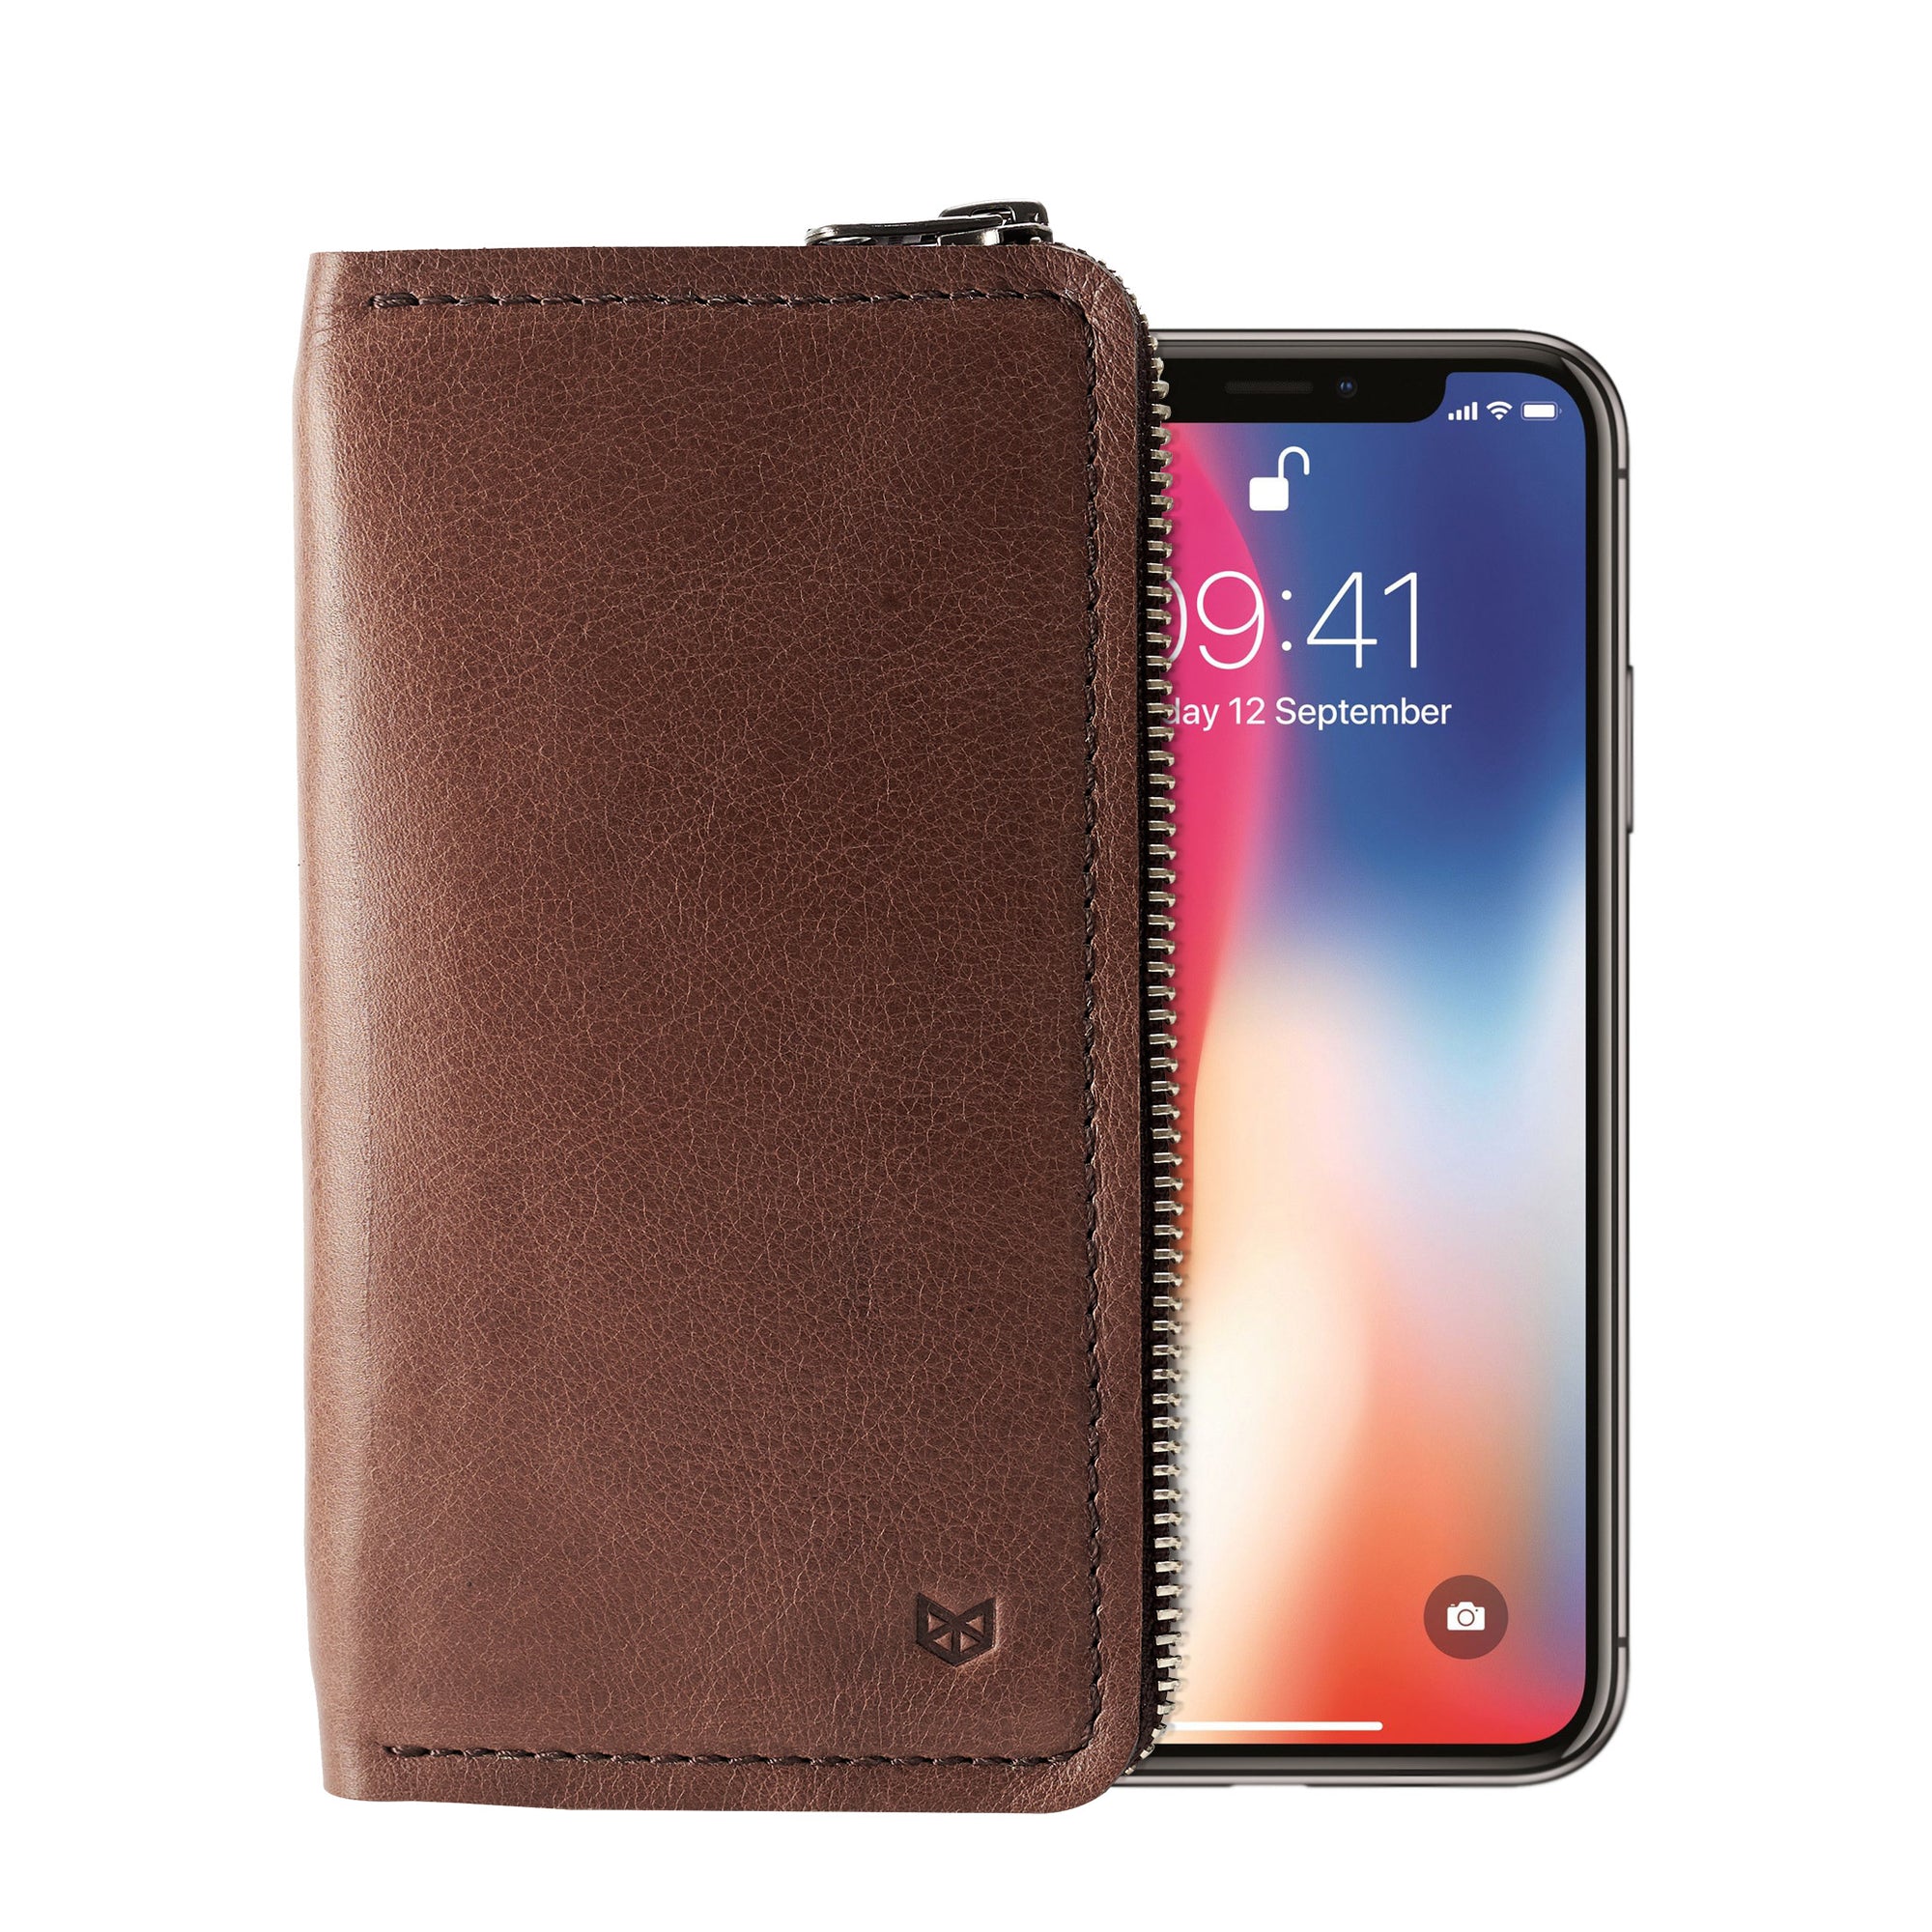 Brown iPhone leather wallet stand case for mens gifts. iPhone x, iPhone 10, iPhone 8 plus leather stand sleeve